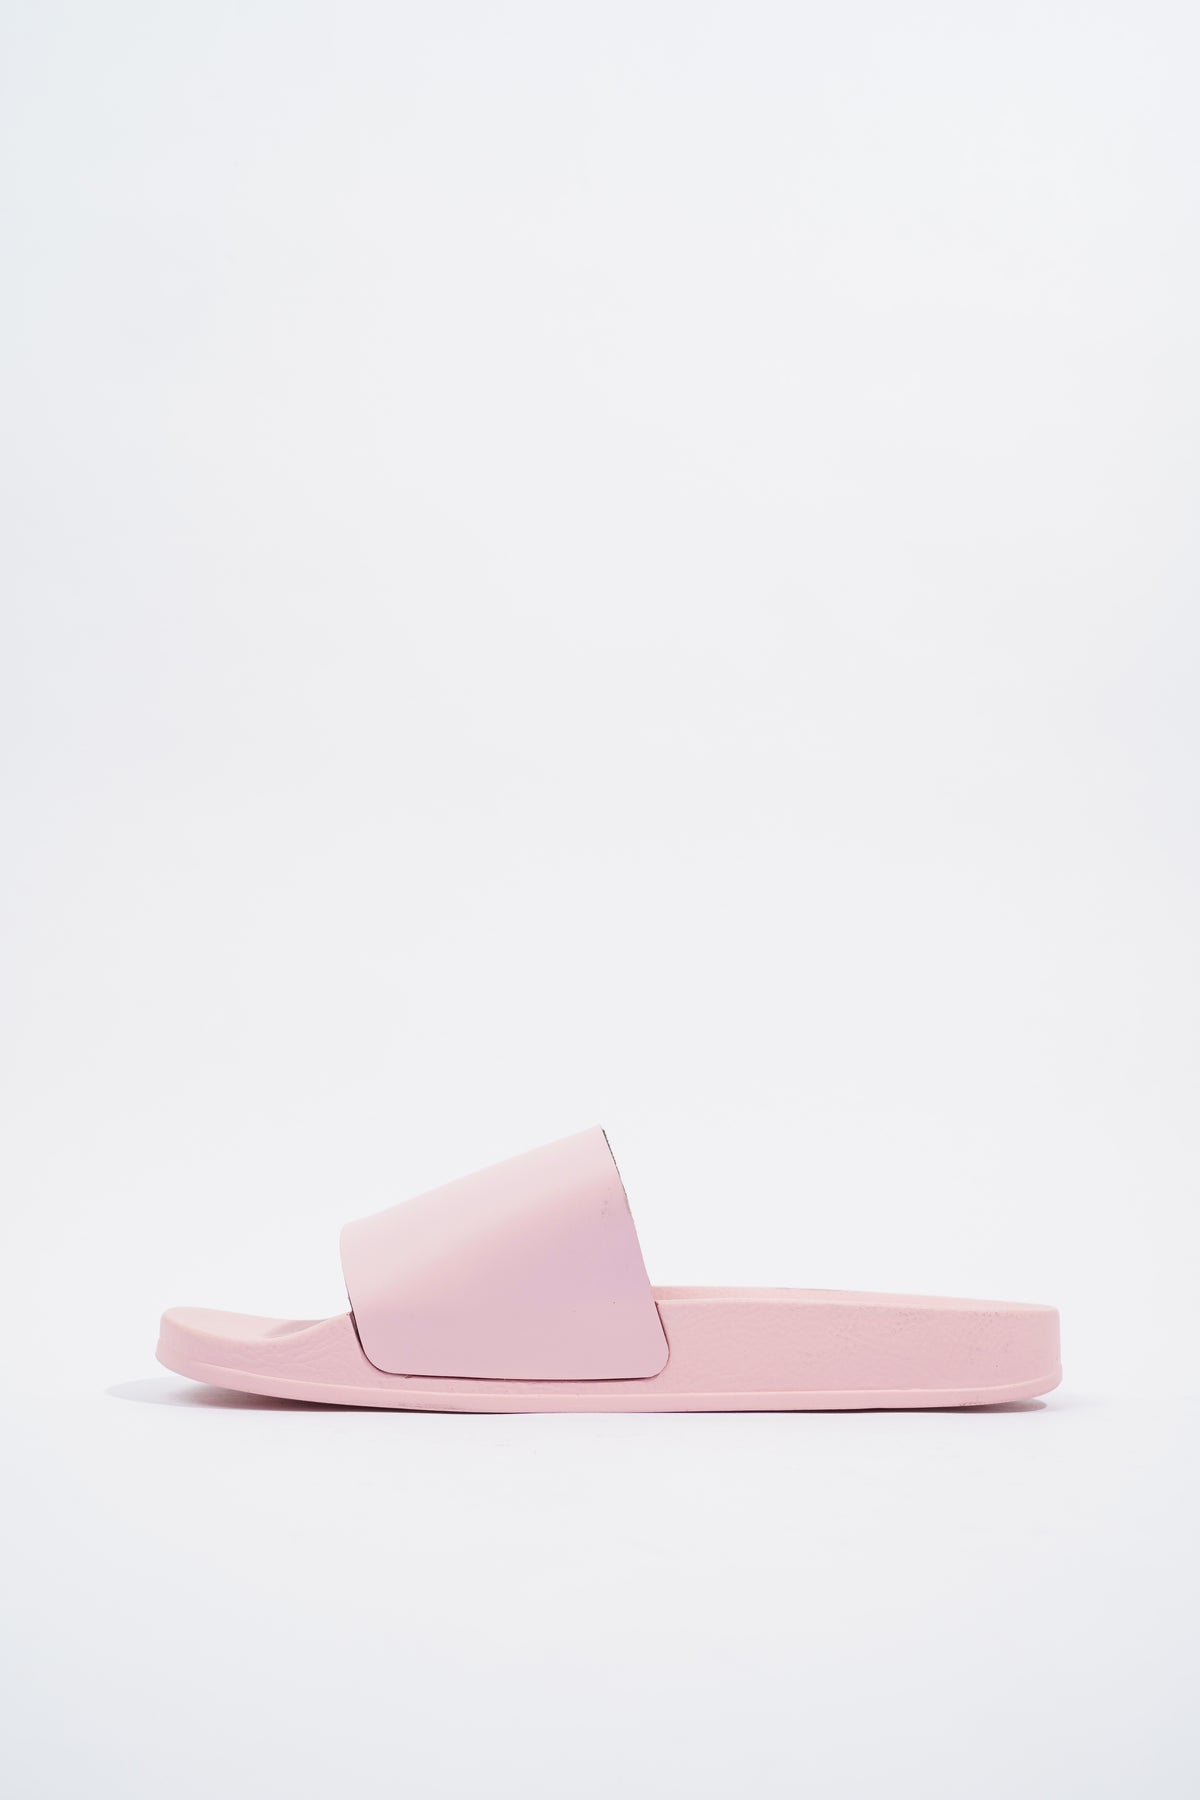 Pool pillow leather mules Louis Vuitton Pink size 41 EU in Leather